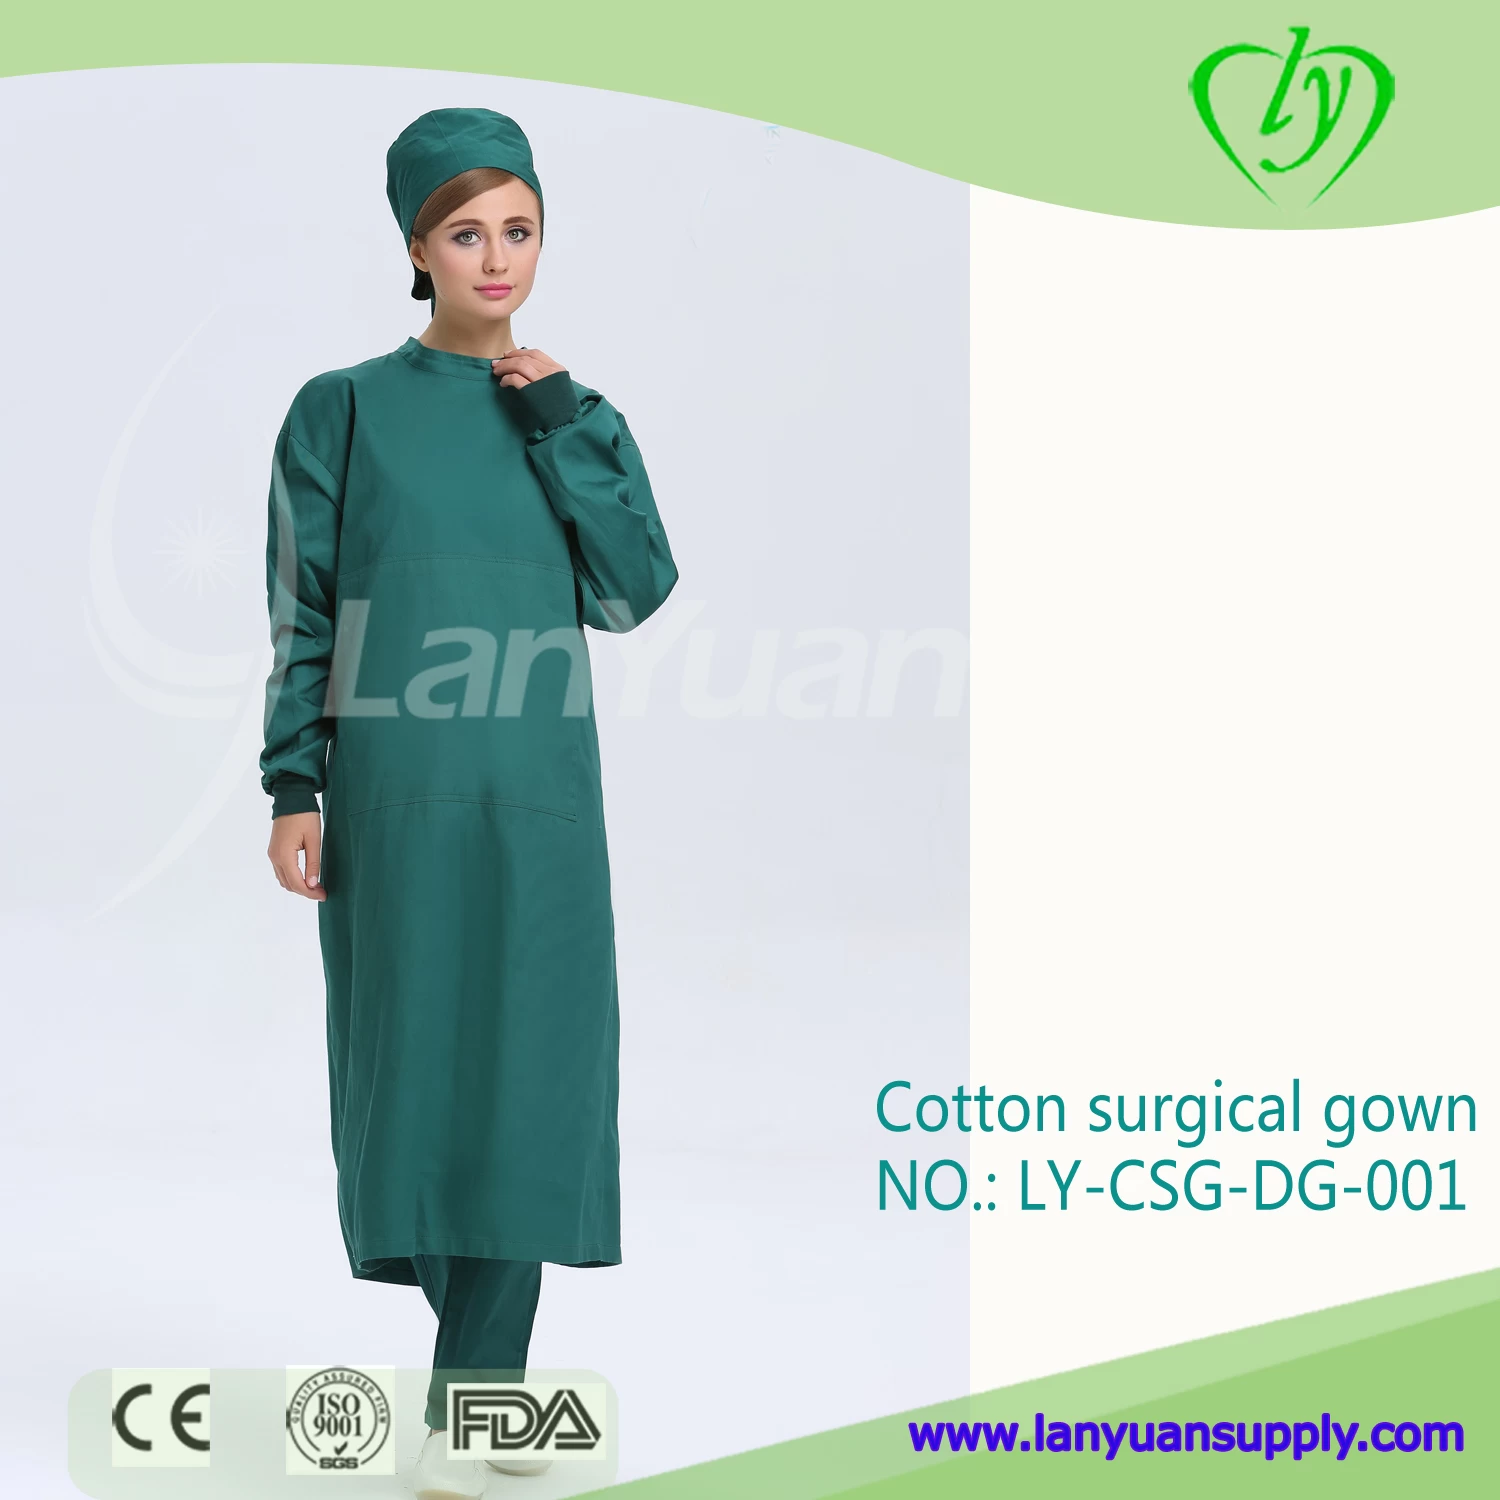 Isolation Gowns- Level 3-Reusable- Made in US - David Scott Company